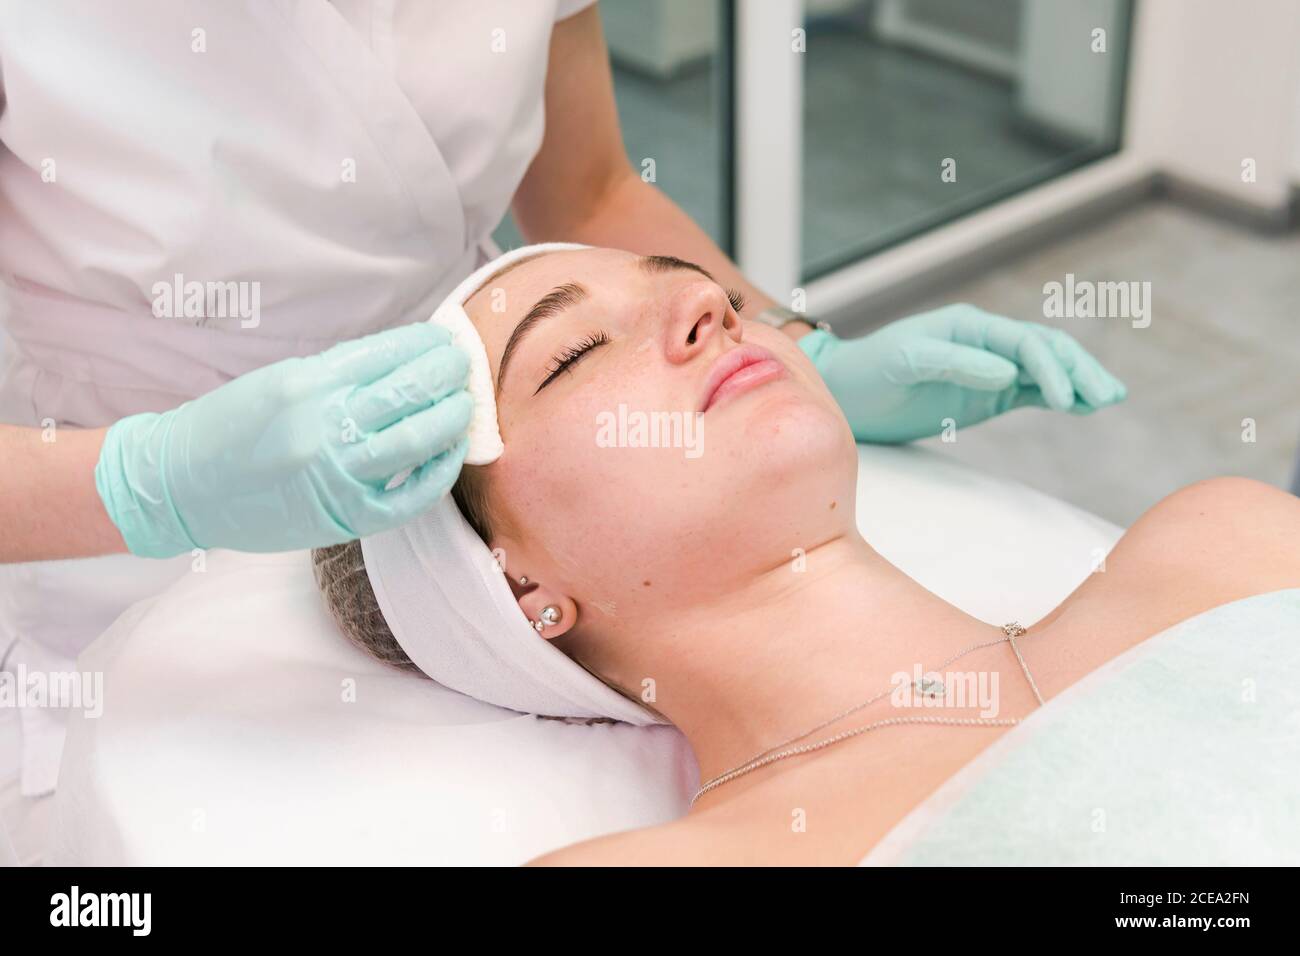 The young female client of cosmetic salon having a face cleaning procedure. The doctor cosmetologist cleaning skin with sponge. Concepts of skin care Stock Photo